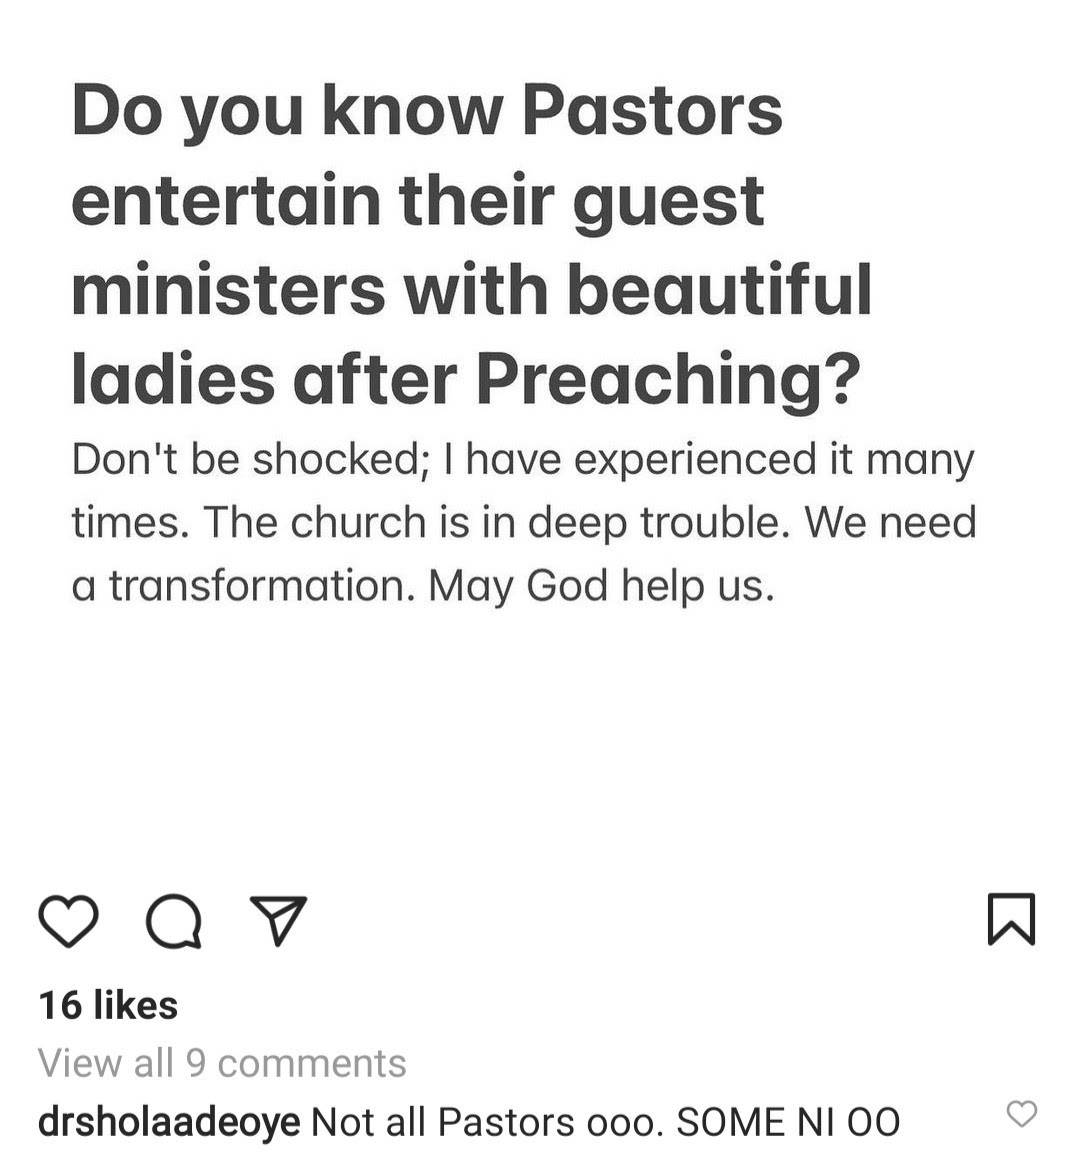 "Pastors entertain their guest ministers with beautiful ladies after preaching" - Houston-based Nigerian pastor, Shola Adeoye, alleges 